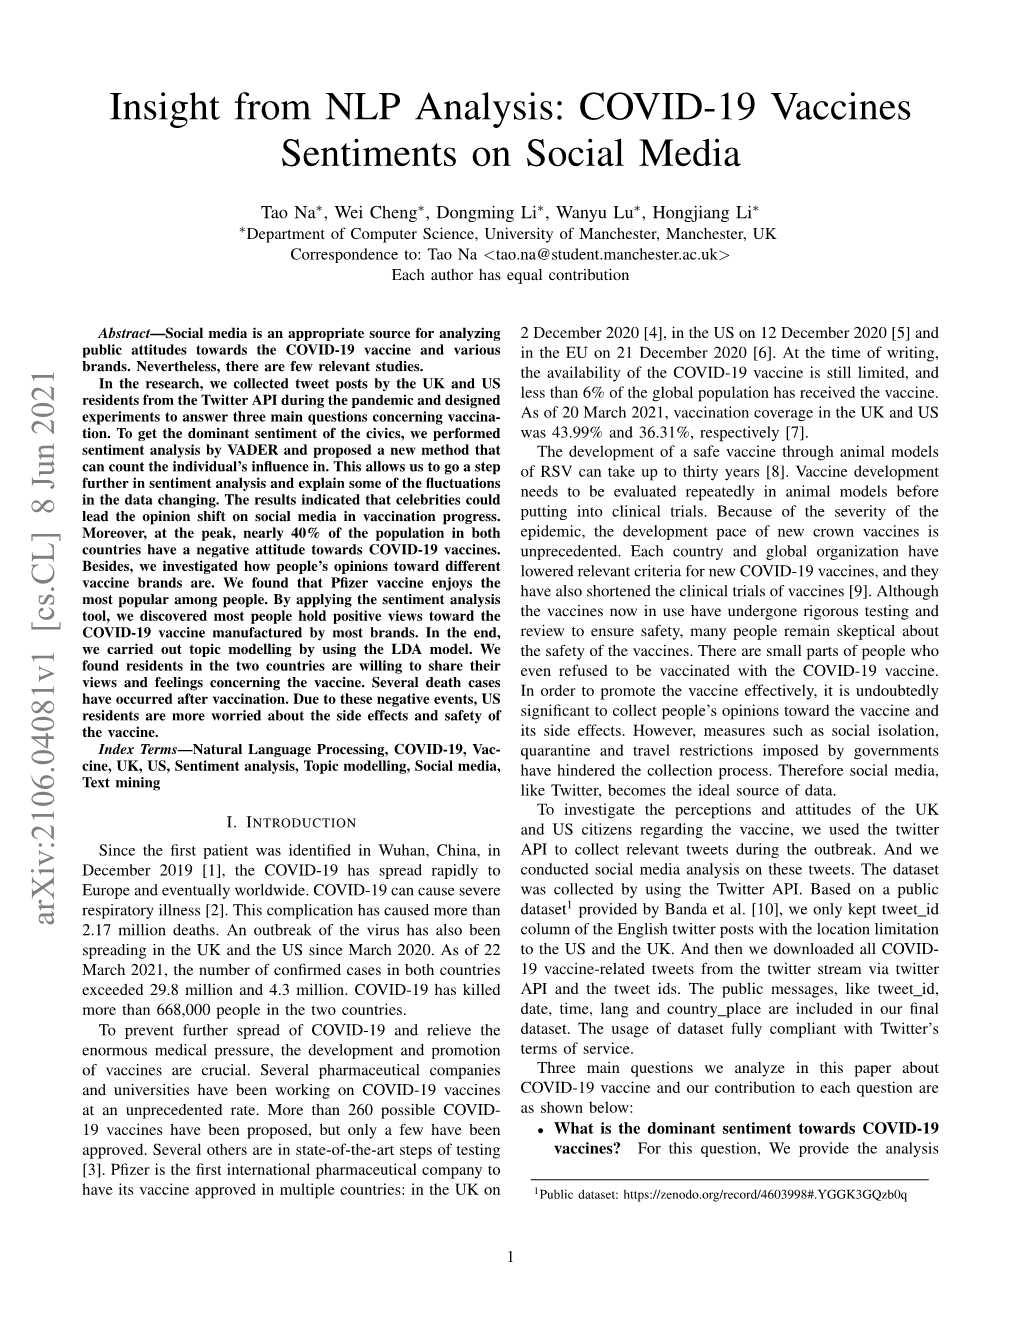 Insight from NLP Analysis: COVID-19 Vaccines Sentiments on Social Media